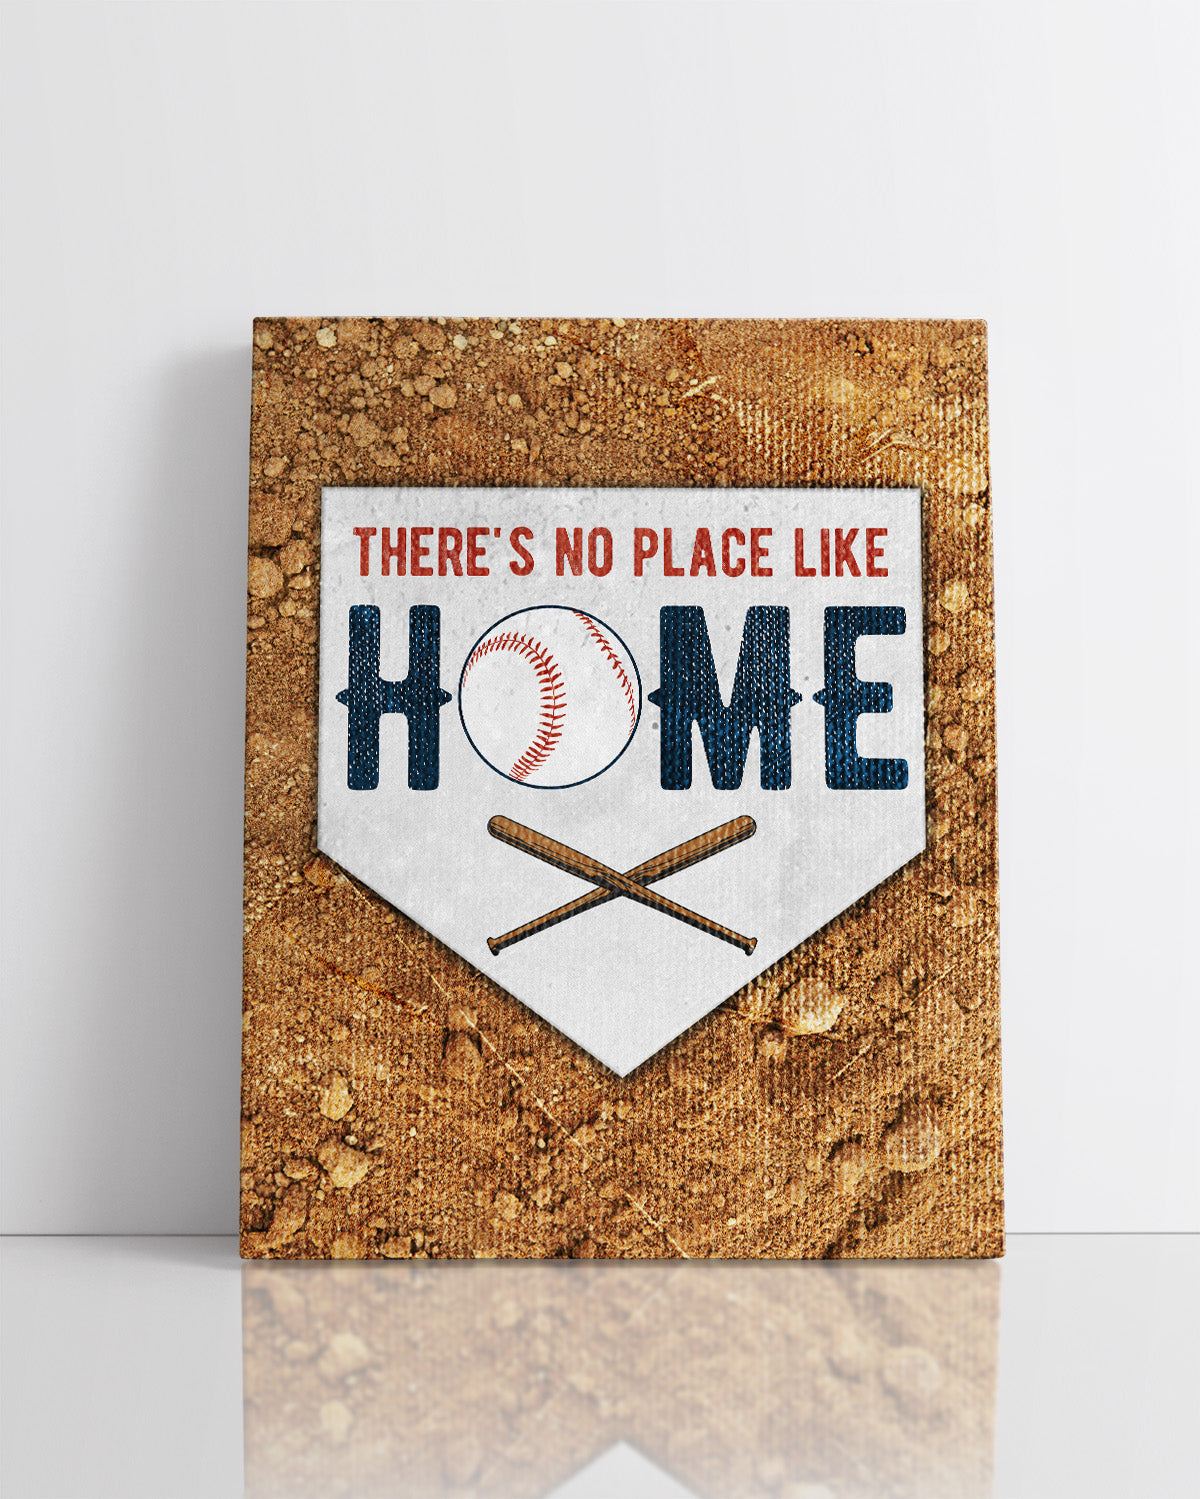 There's No Place Like Home - Baseball Motivational Sports Quotes - Baseball Wall Art for Boys Bedroom, Baseball Coach Gift - Inspirational Baseball Wall Decor